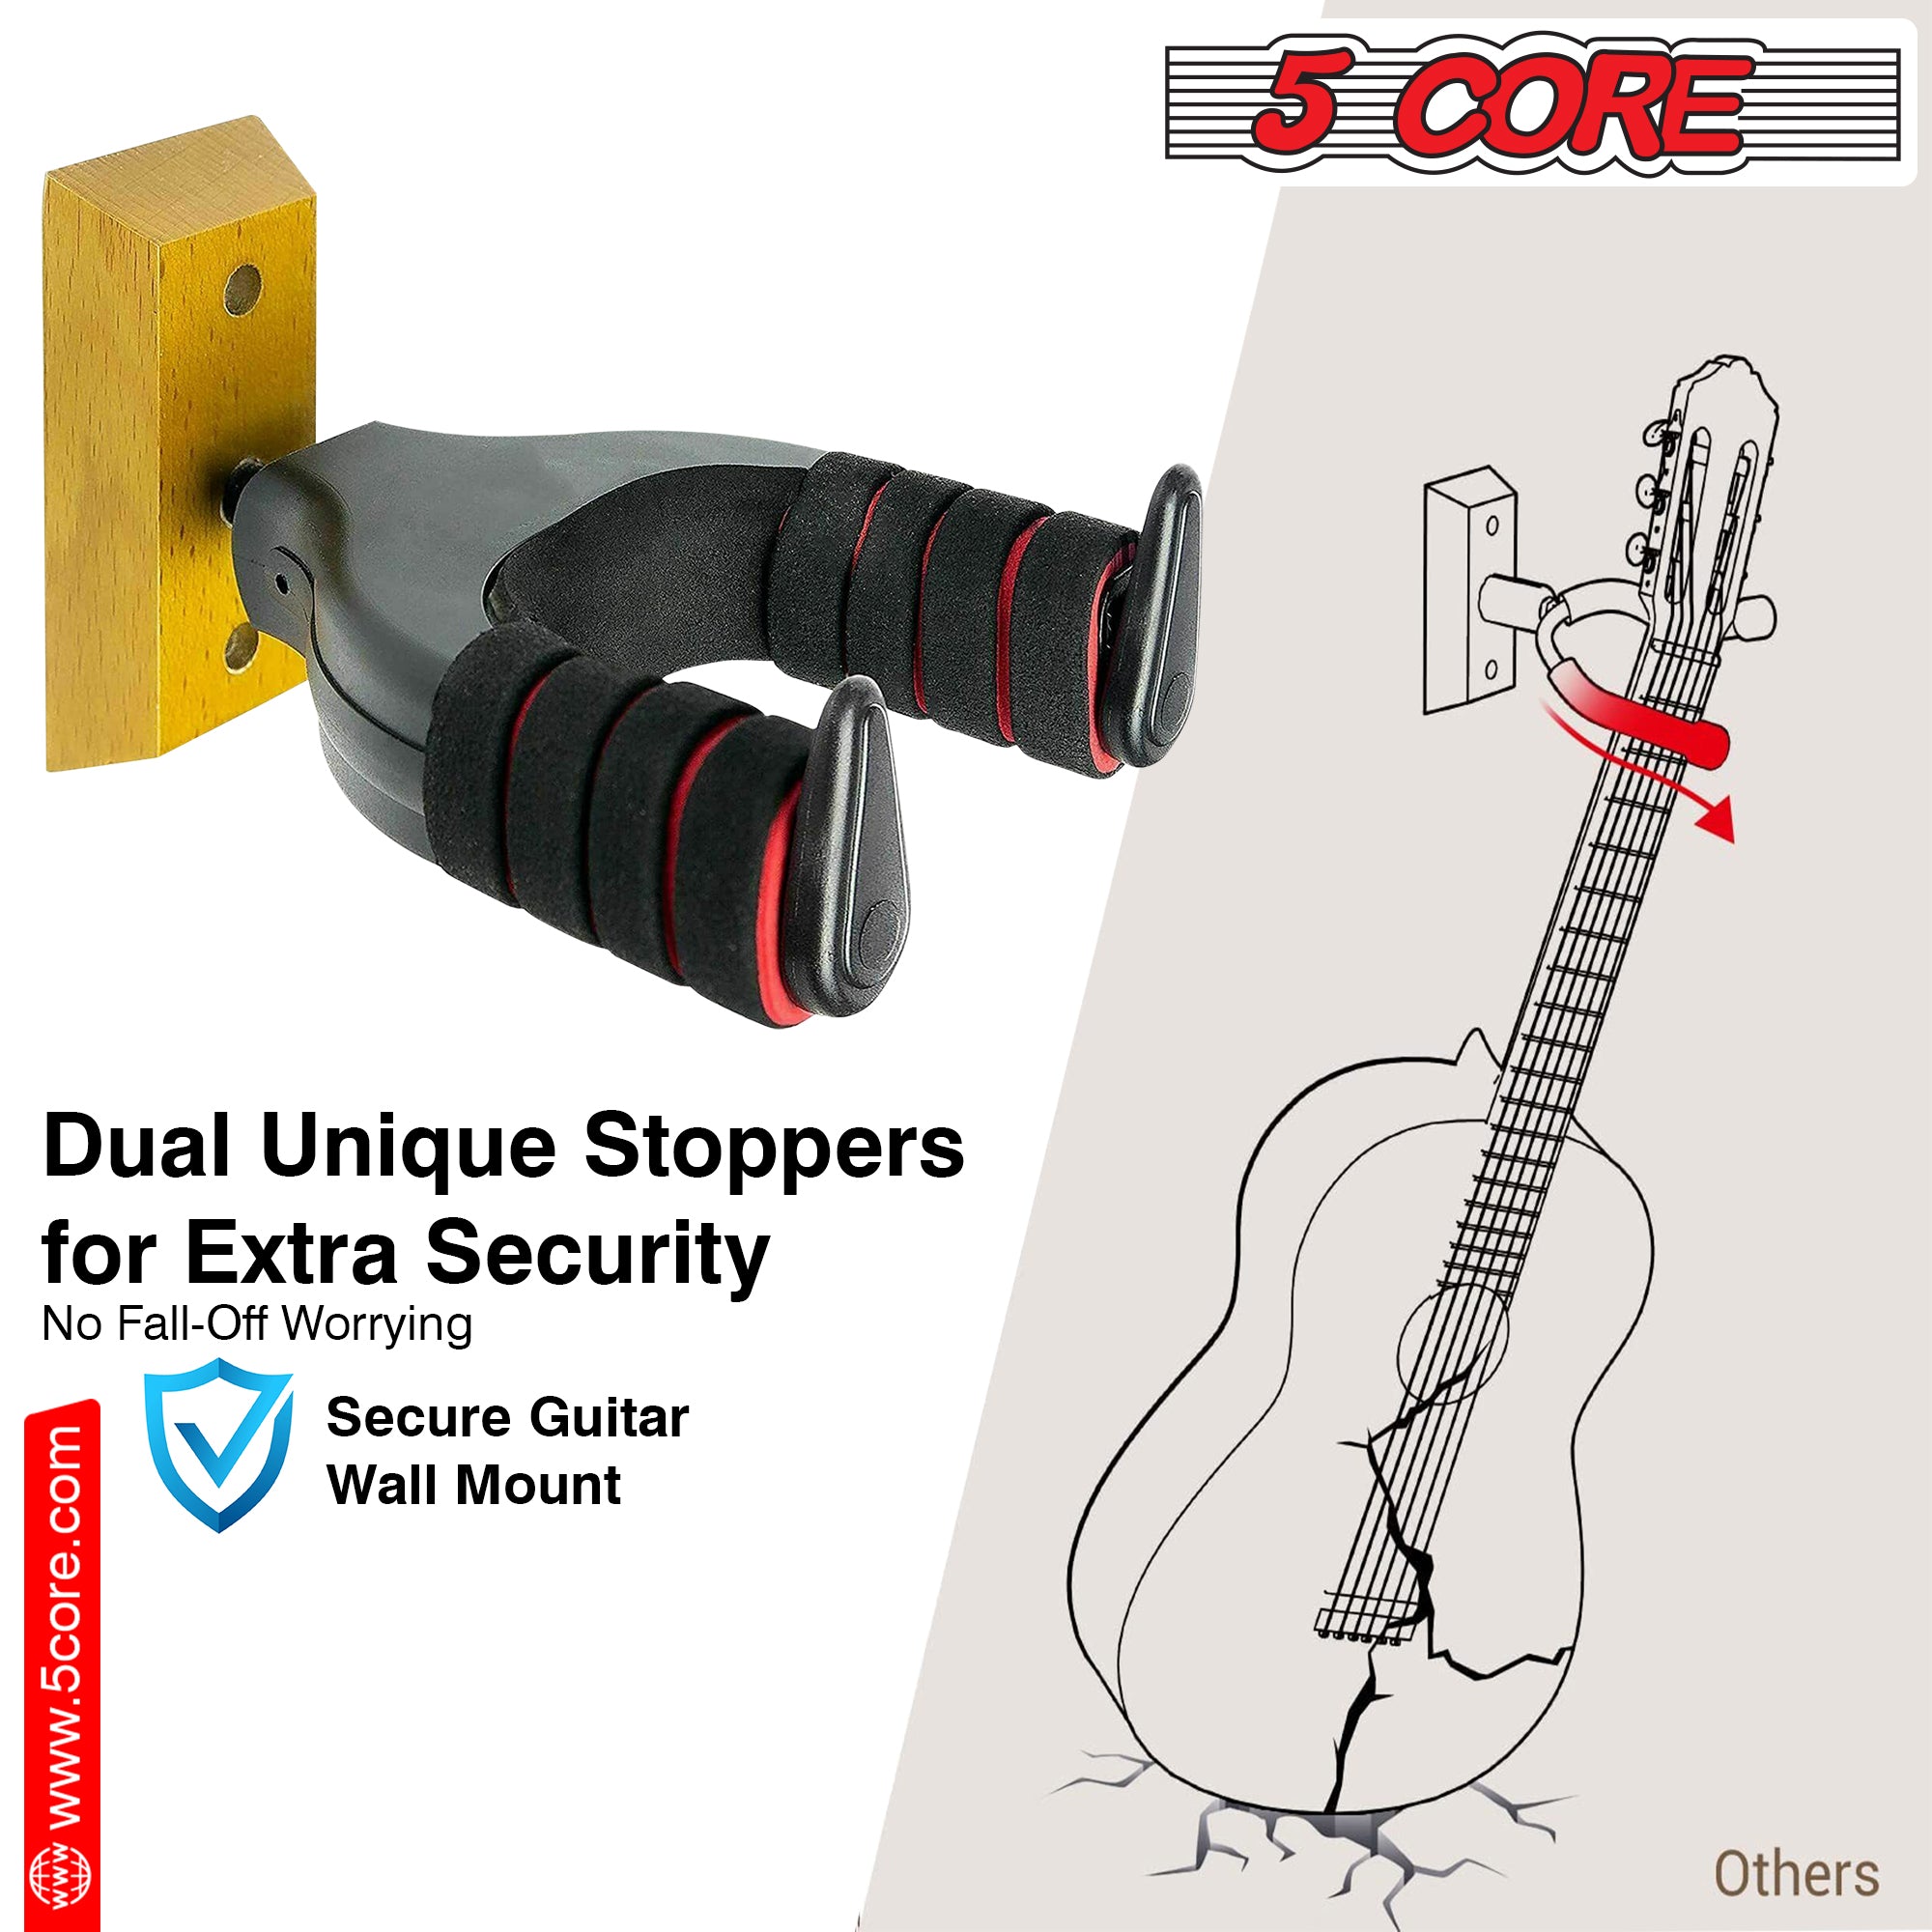 5Core Guitar Wall Mount Hanger Adjustable Rotatable Guitar Wall Holder Hook w Soft Padding